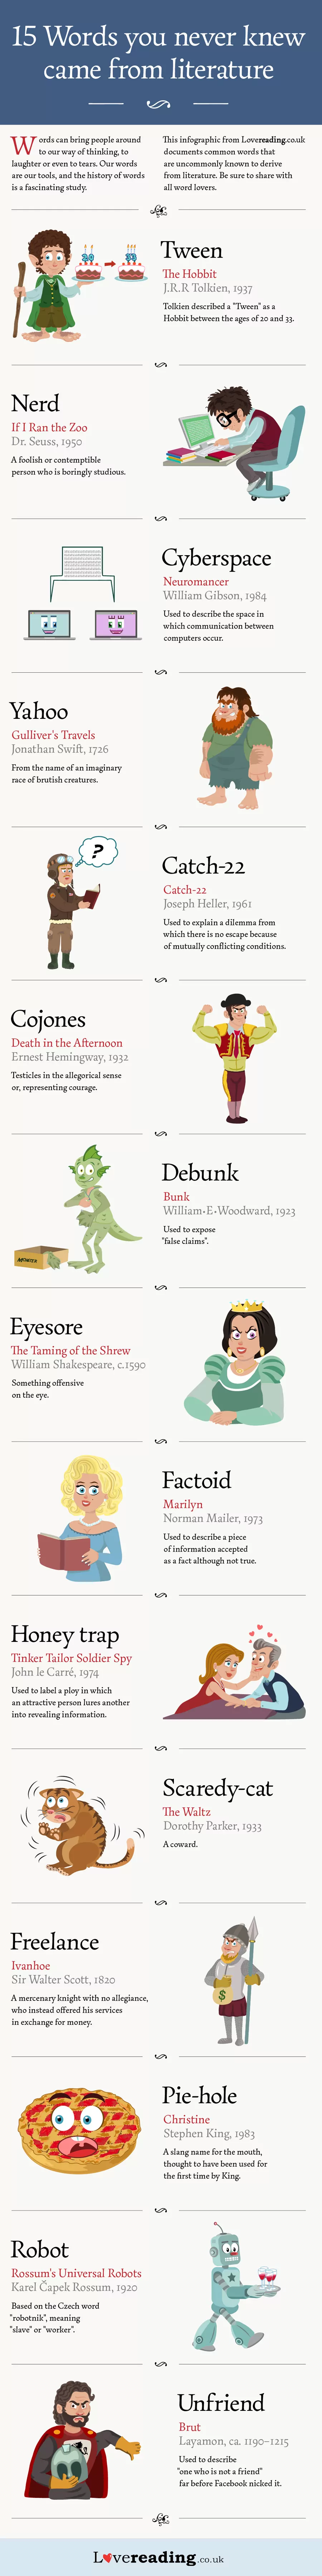 Awesome Visual on The Origins of 15 Commonly Used Words